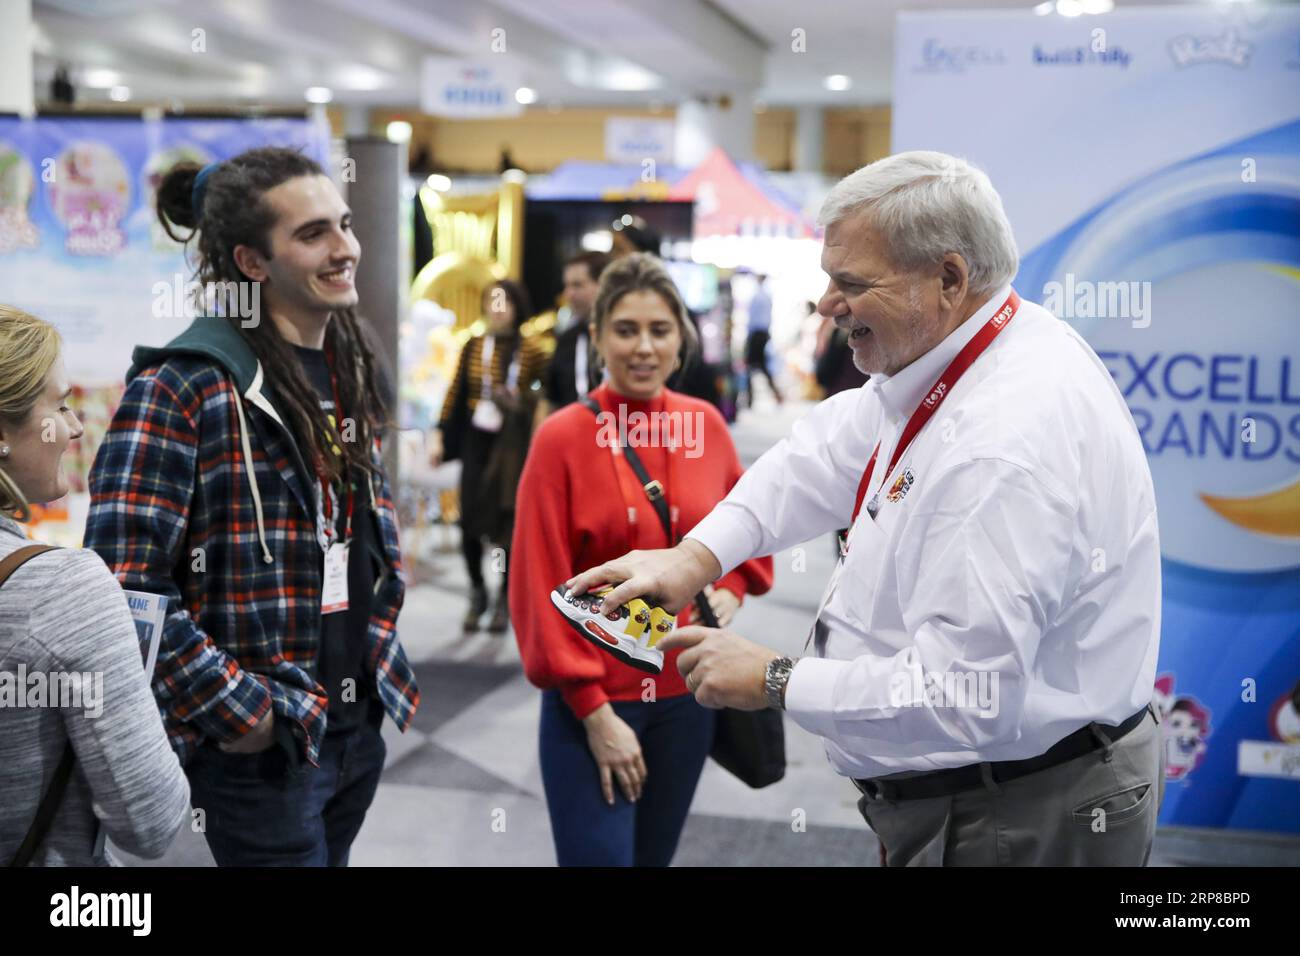 (190226) -- BEIJING, Feb. 26, 2019 -- Ken Silvestri (1st R), a staff worker of Choo Choo Shoes, shows the company s product to visitors at their booth during the 116th Annual North American International Toy Fair at the Jacob K. Javits Convention Center in New York, the United States, on Feb. 18, 2019. ) Xinhua headlines: More fun toys, no painful tariffs: American toymakers hopeful on U.S.-China trade deal WangxYing PUBLICATIONxNOTxINxCHN Stock Photo